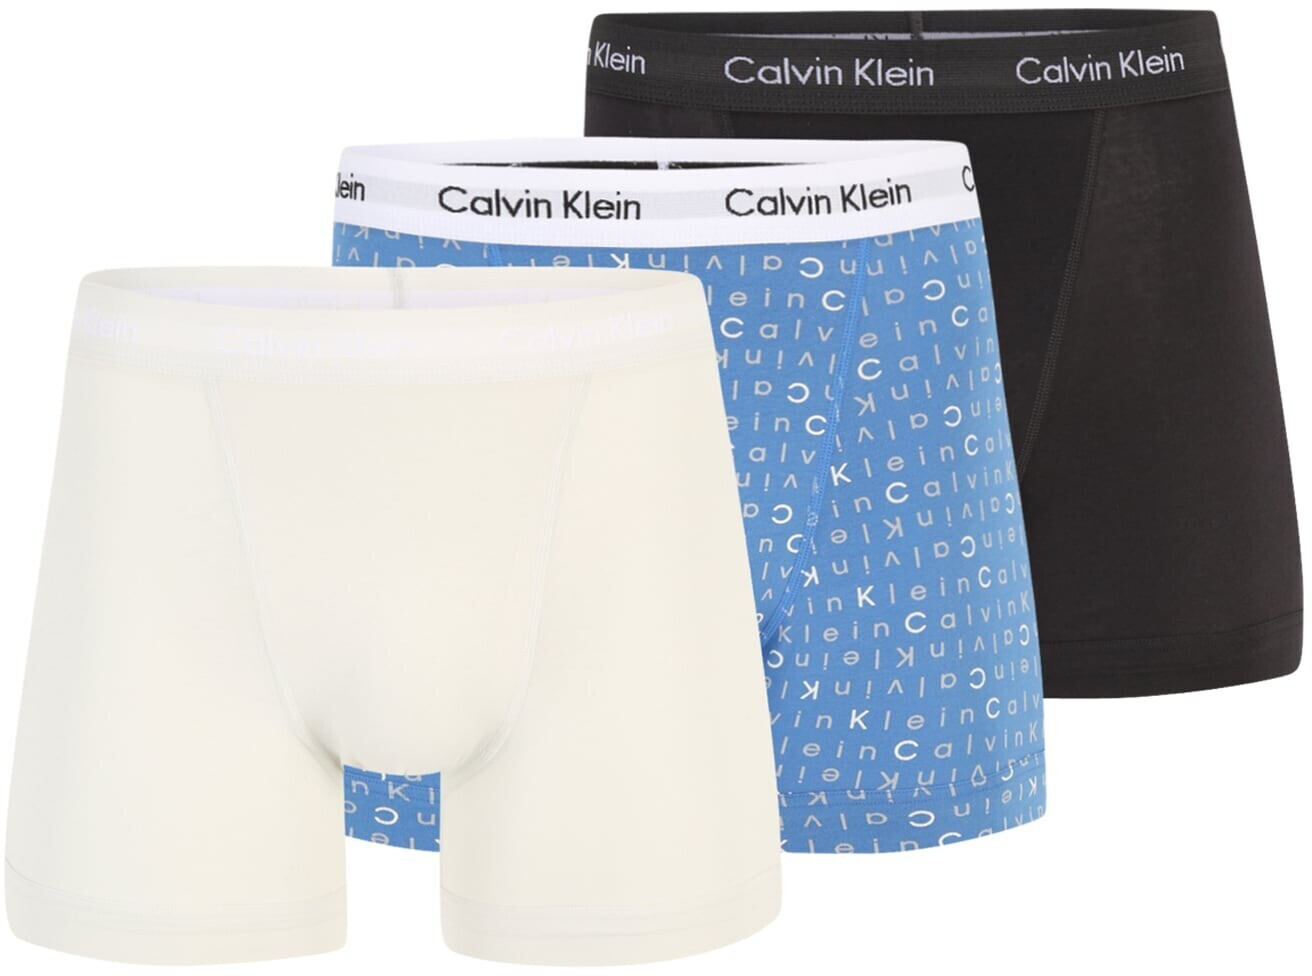 Buy Calvin Klein 3-Pack Shorts - Cotton Stretch (U2662G) ptm gry/vprs gry  /spcblu sbd ttl from £19.00 (Today) – Best Deals on